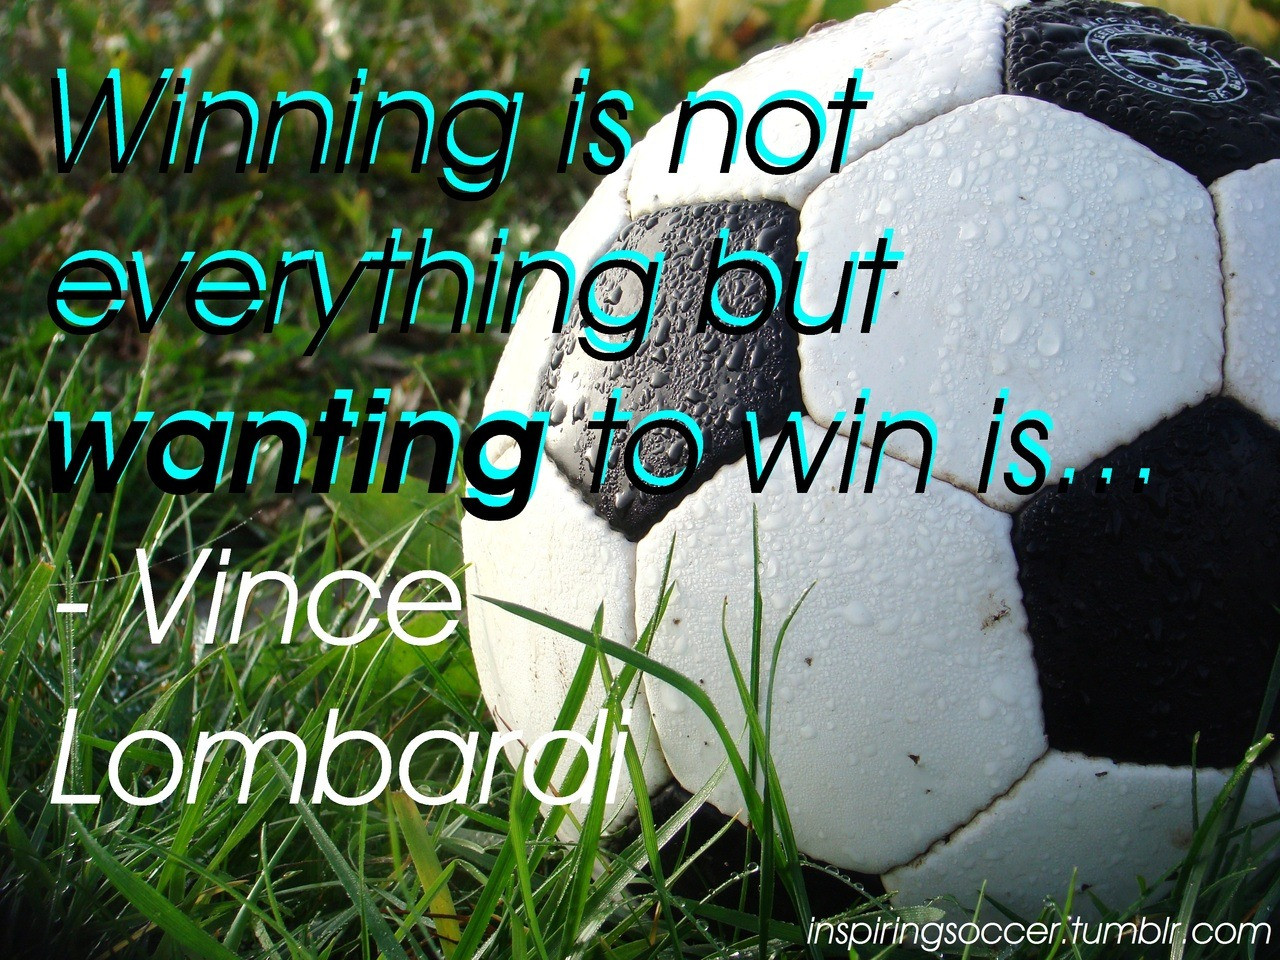 Soccer Motivational Quotes
 Inspirational Quotes For Girls Soccer QuotesGram